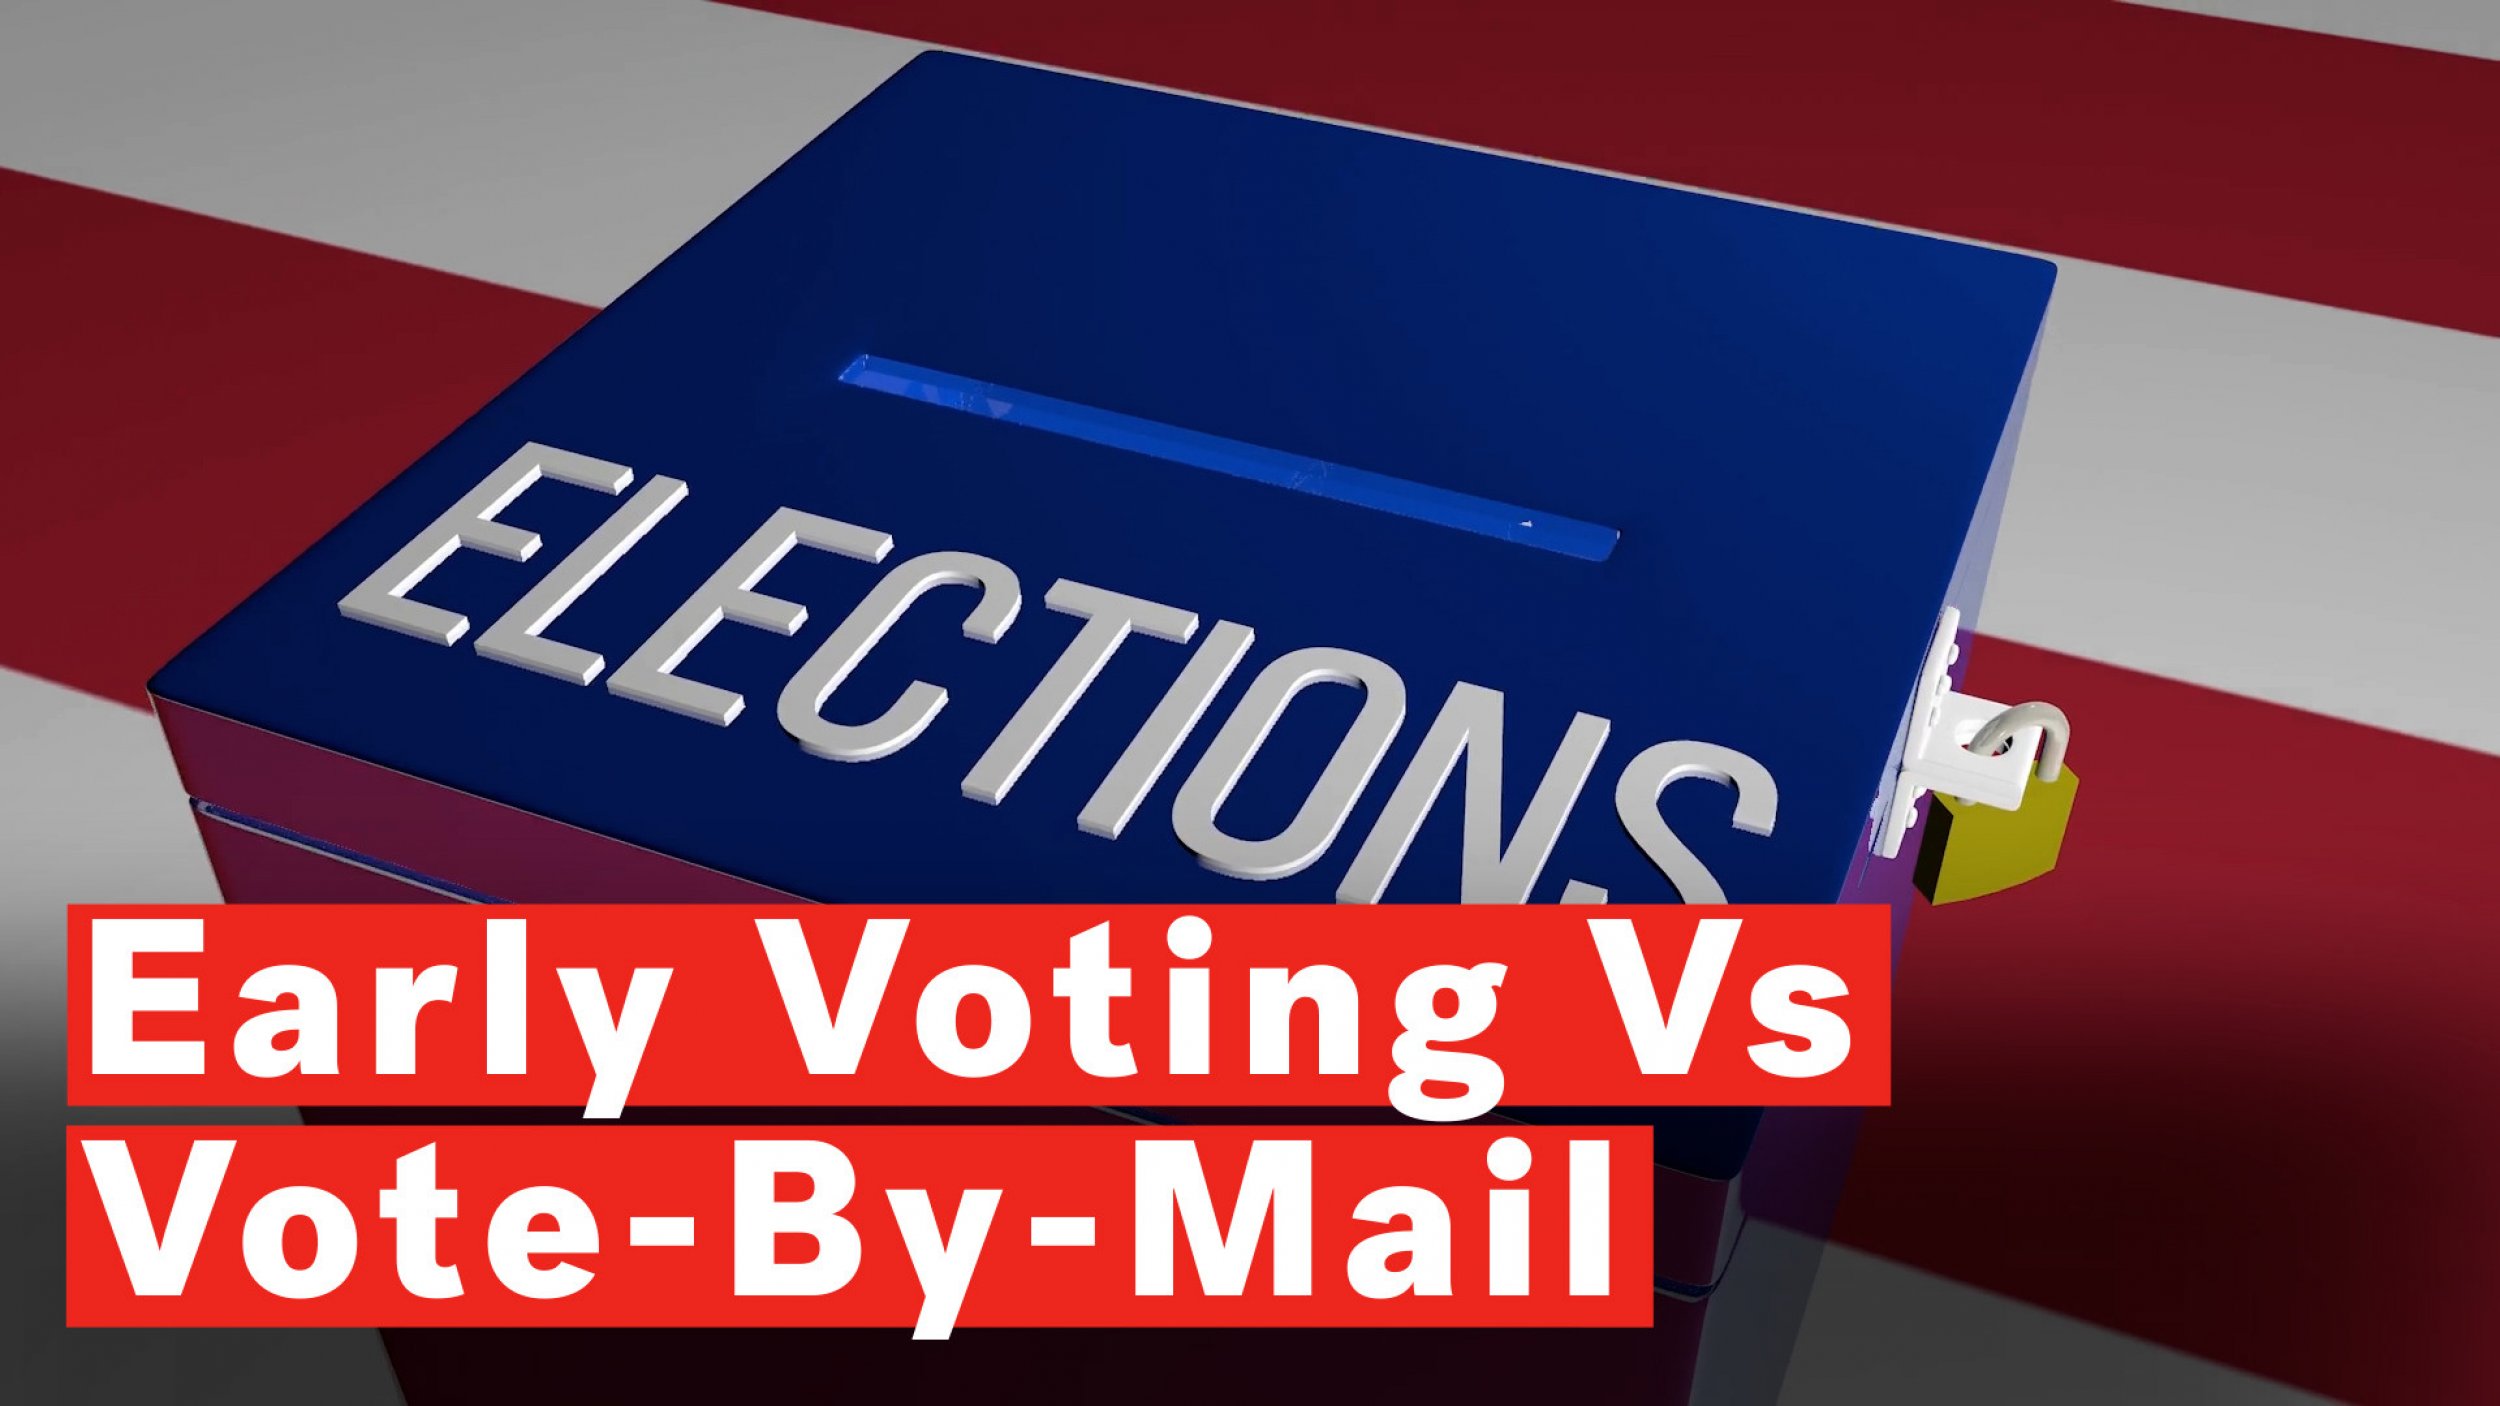 Early Voting, Vote By Mail And Absentee Voting Terms Explained As Election Day Draws Near